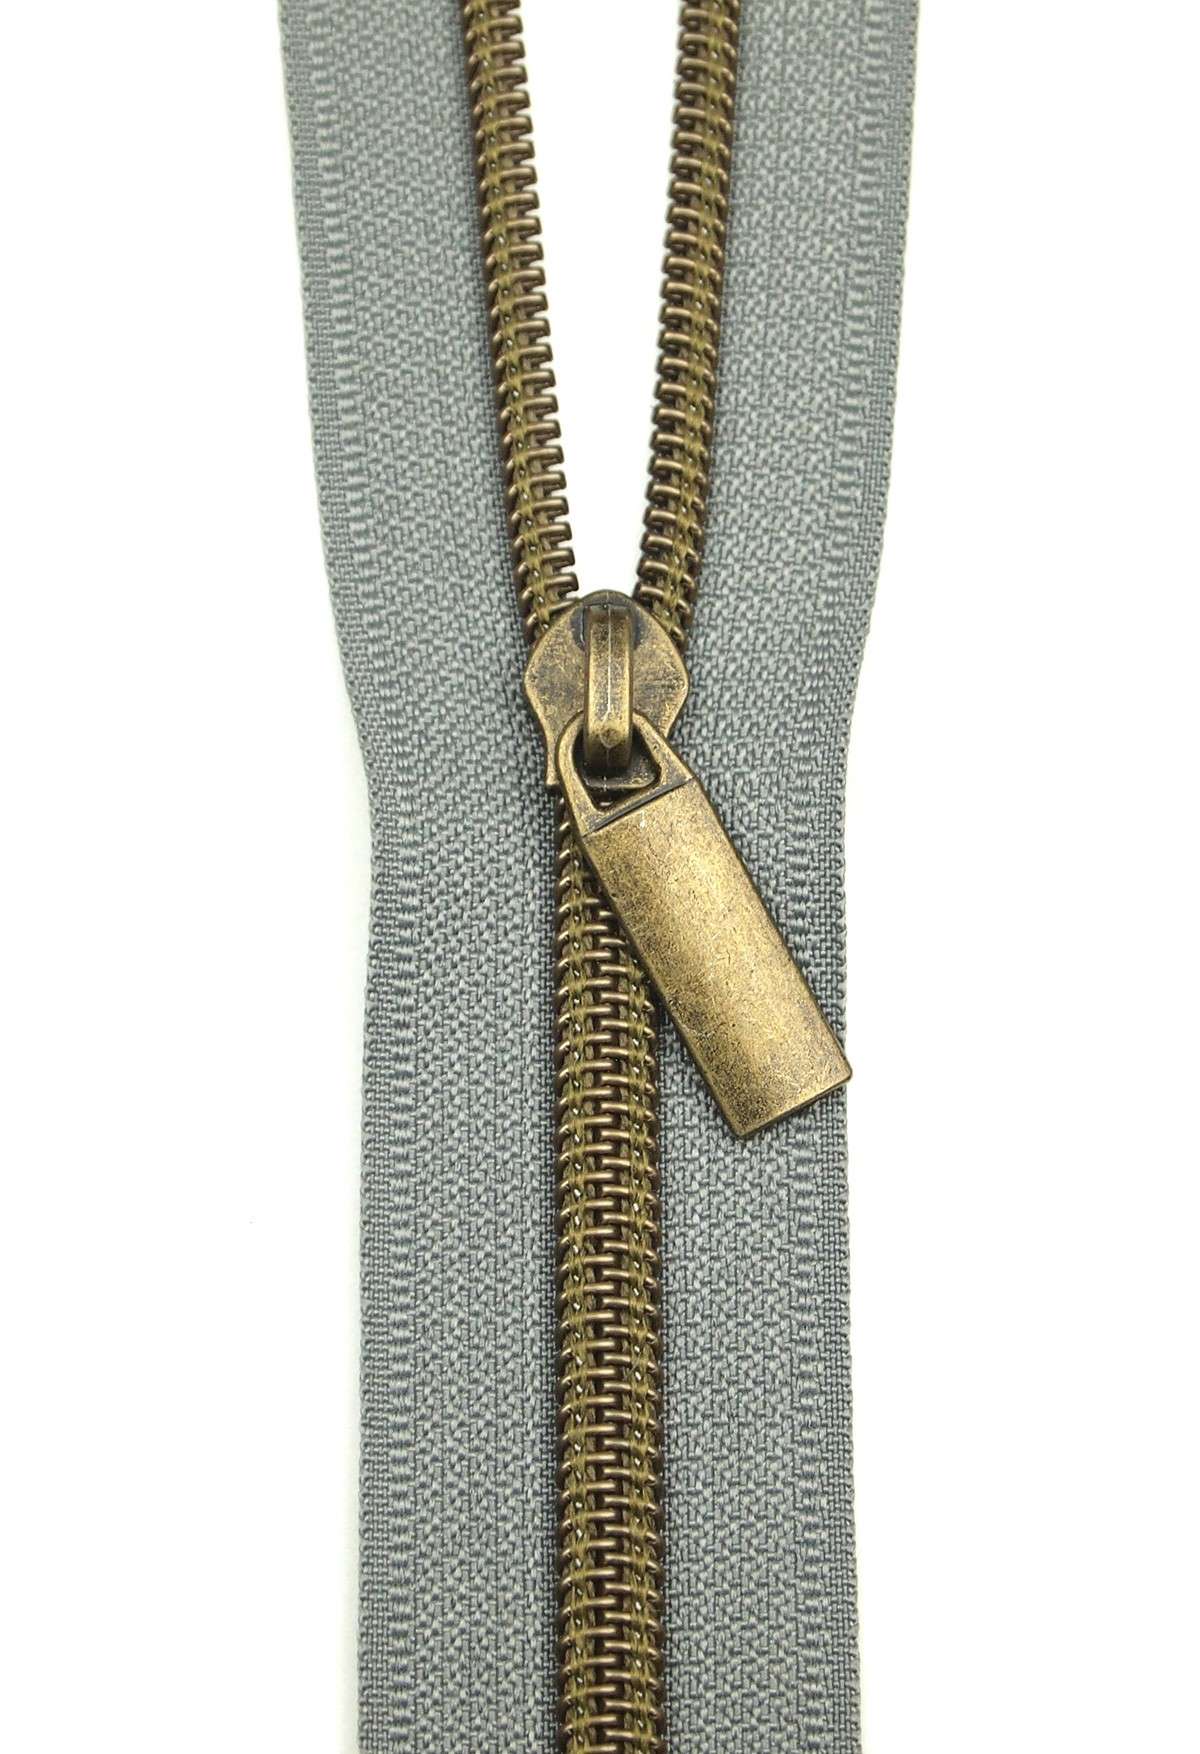 Sallie Tomato #5 Nylon Zippers & Pulls - Grey with Antique Coil